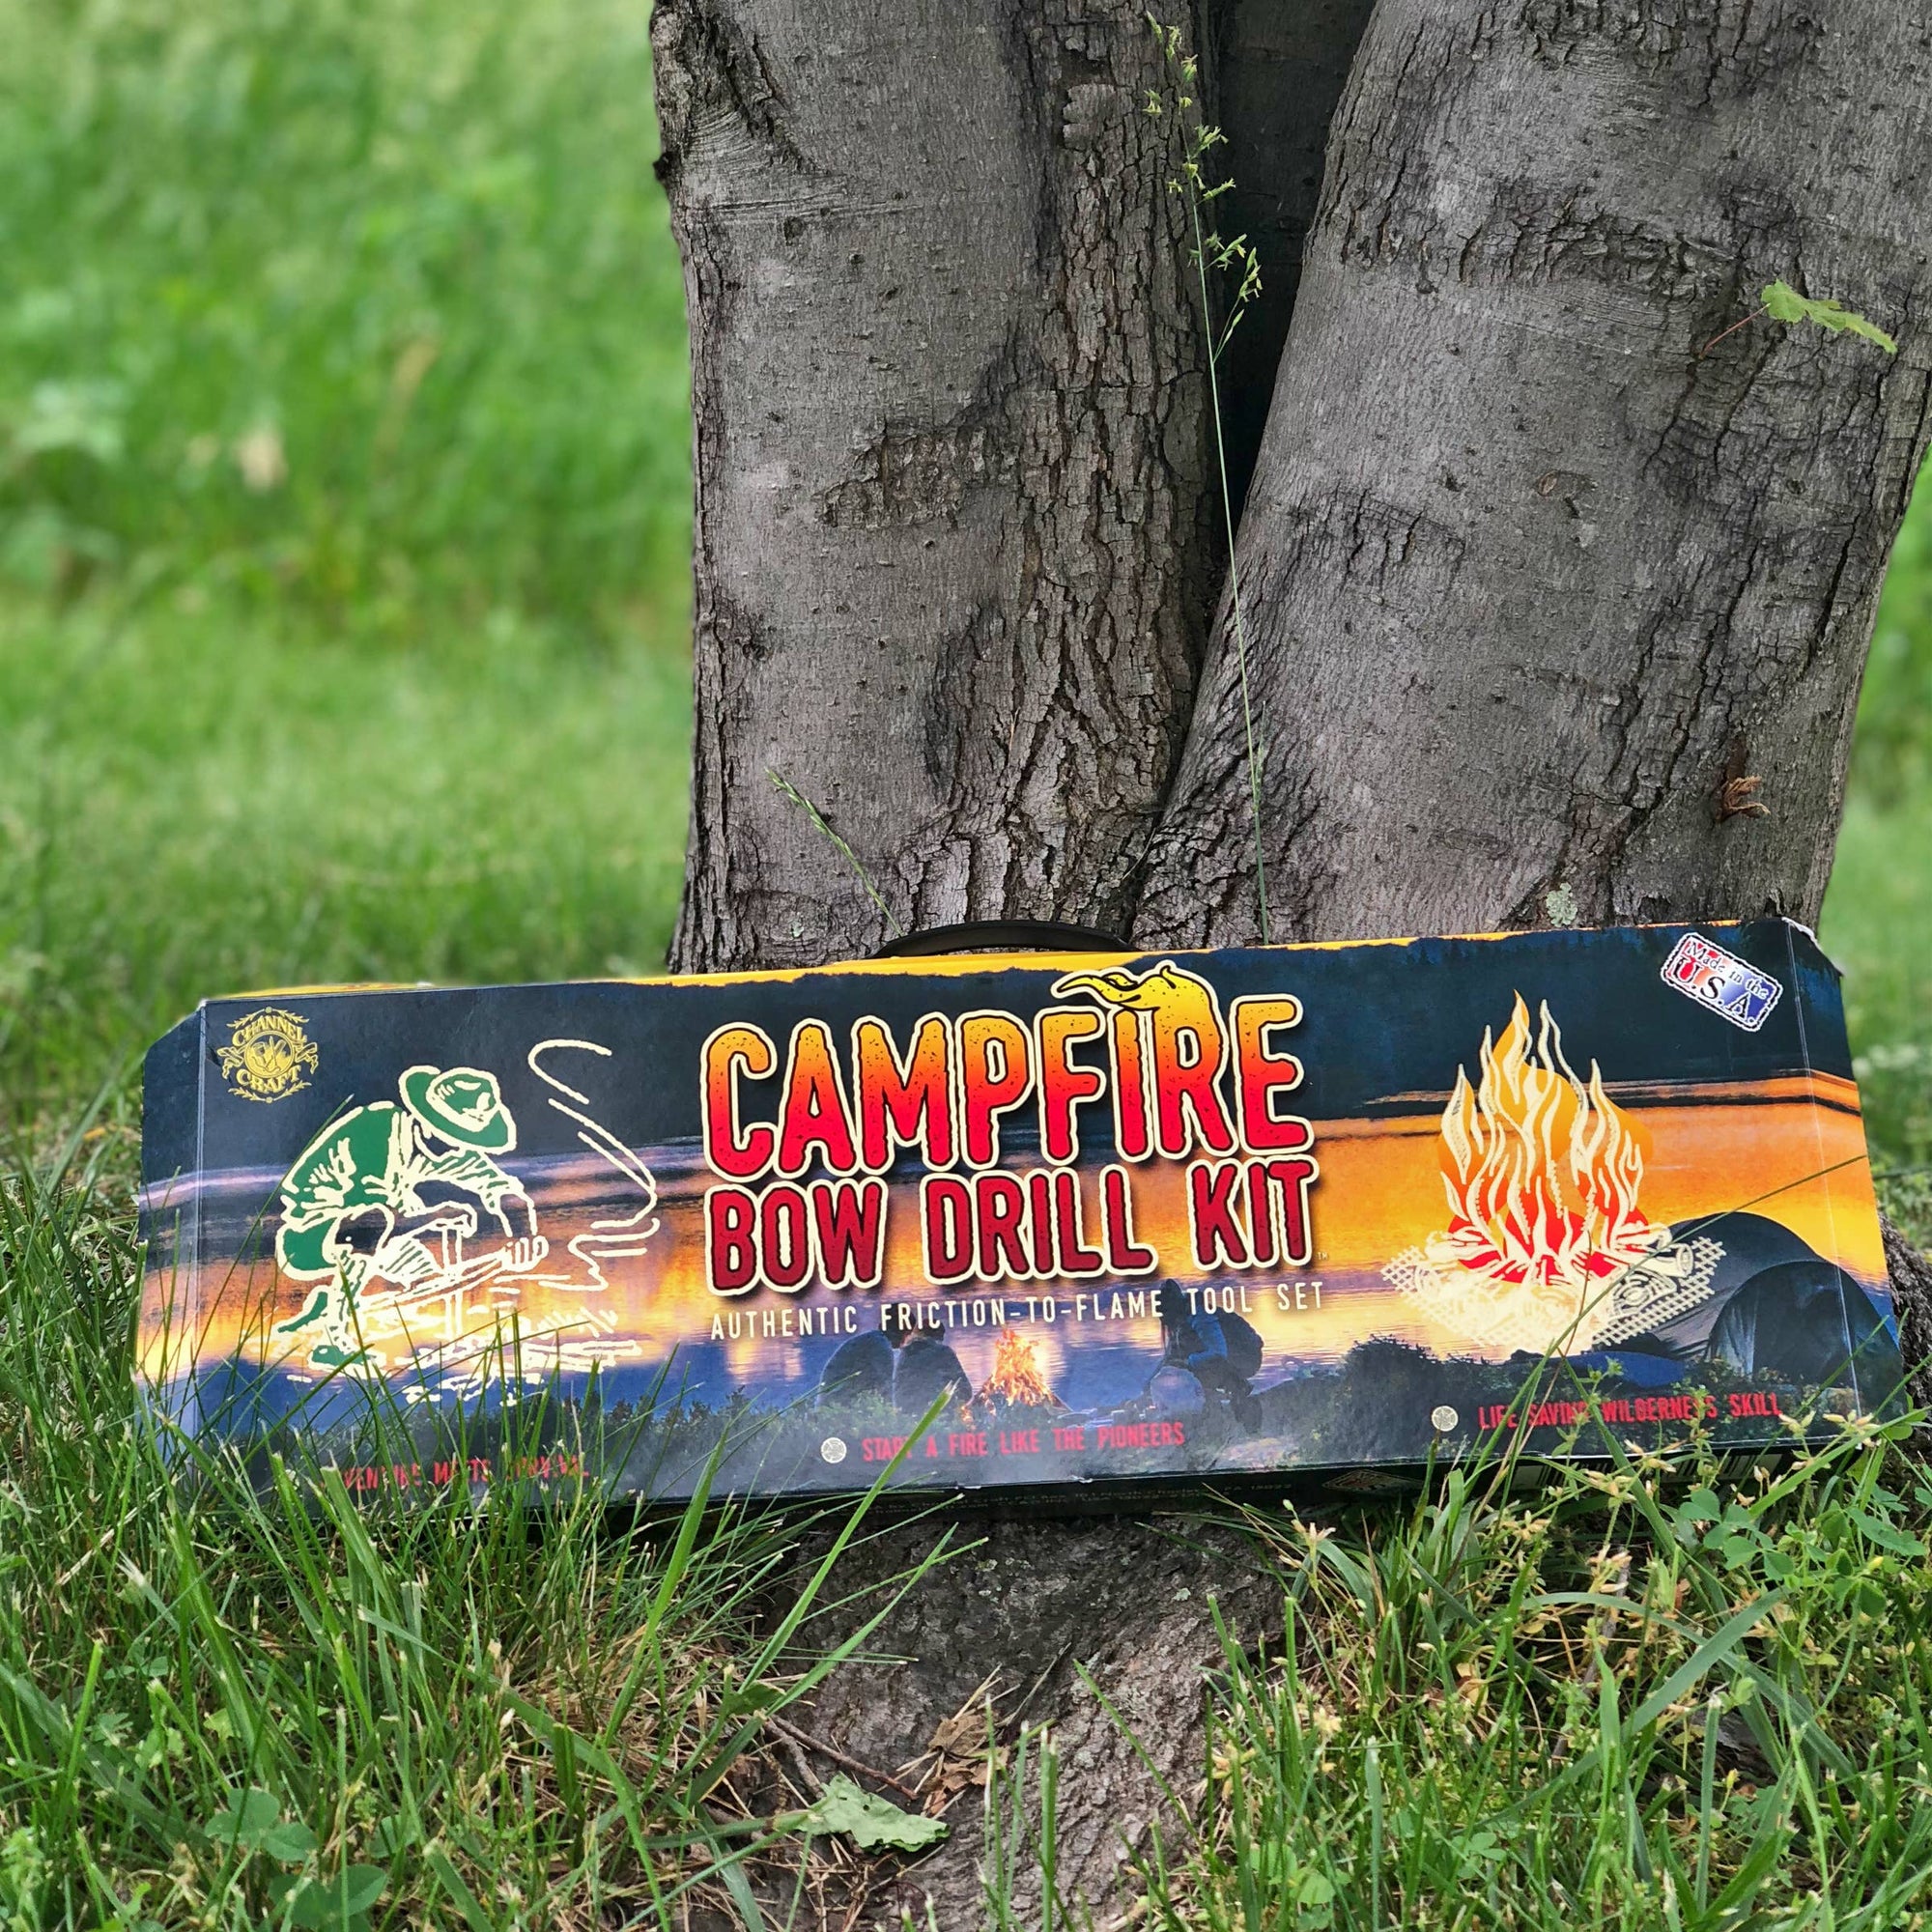 Campfire Bow Drill Kit placed at the base of a tree, packaging features vibrant fire graphics and text.